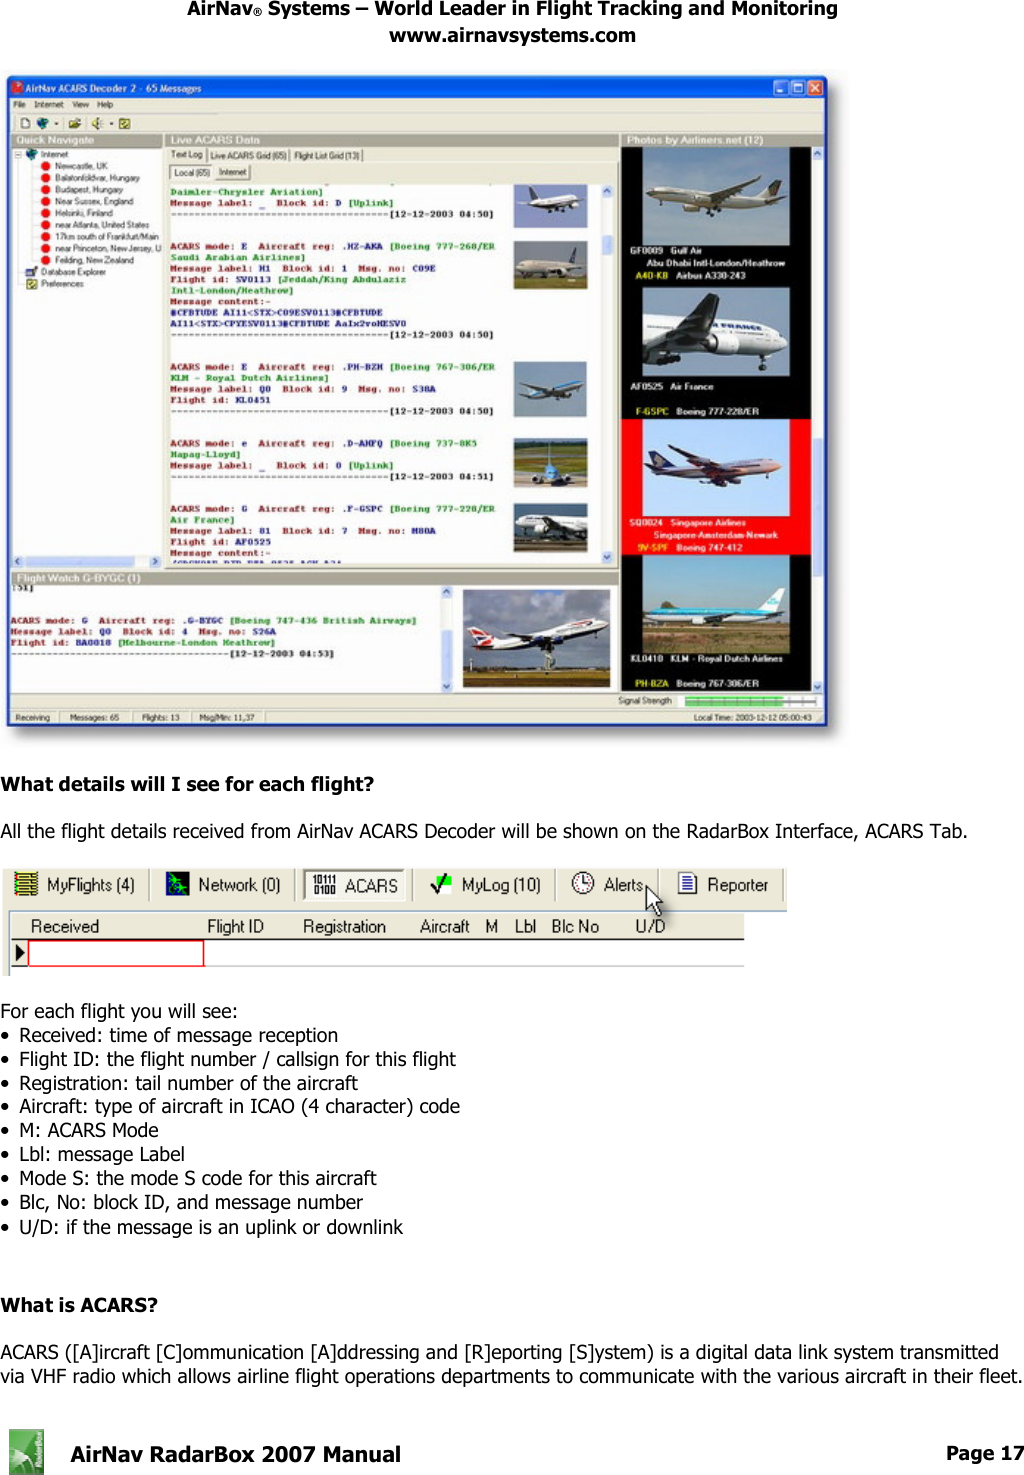 AirNav® Systems – World Leader in Flight Tracking and Monitoring www.airnavsystems.com   AirNav RadarBox 2007 Manual  Page 17        What details will I see for each flight?  All the flight details received from AirNav ACARS Decoder will be shown on the RadarBox Interface, ACARS Tab.    For each flight you will see: •  Received: time of message reception •  Flight ID: the flight number / callsign for this flight •  Registration: tail number of the aircraft •  Aircraft: type of aircraft in ICAO (4 character) code •  M: ACARS Mode •  Lbl: message Label •  Mode S: the mode S code for this aircraft •  Blc, No: block ID, and message number •  U/D: if the message is an uplink or downlink  What is ACARS?   ACARS ([A]ircraft [C]ommunication [A]ddressing and [R]eporting [S]ystem) is a digital data link system transmitted via VHF radio which allows airline flight operations departments to communicate with the various aircraft in their fleet.   